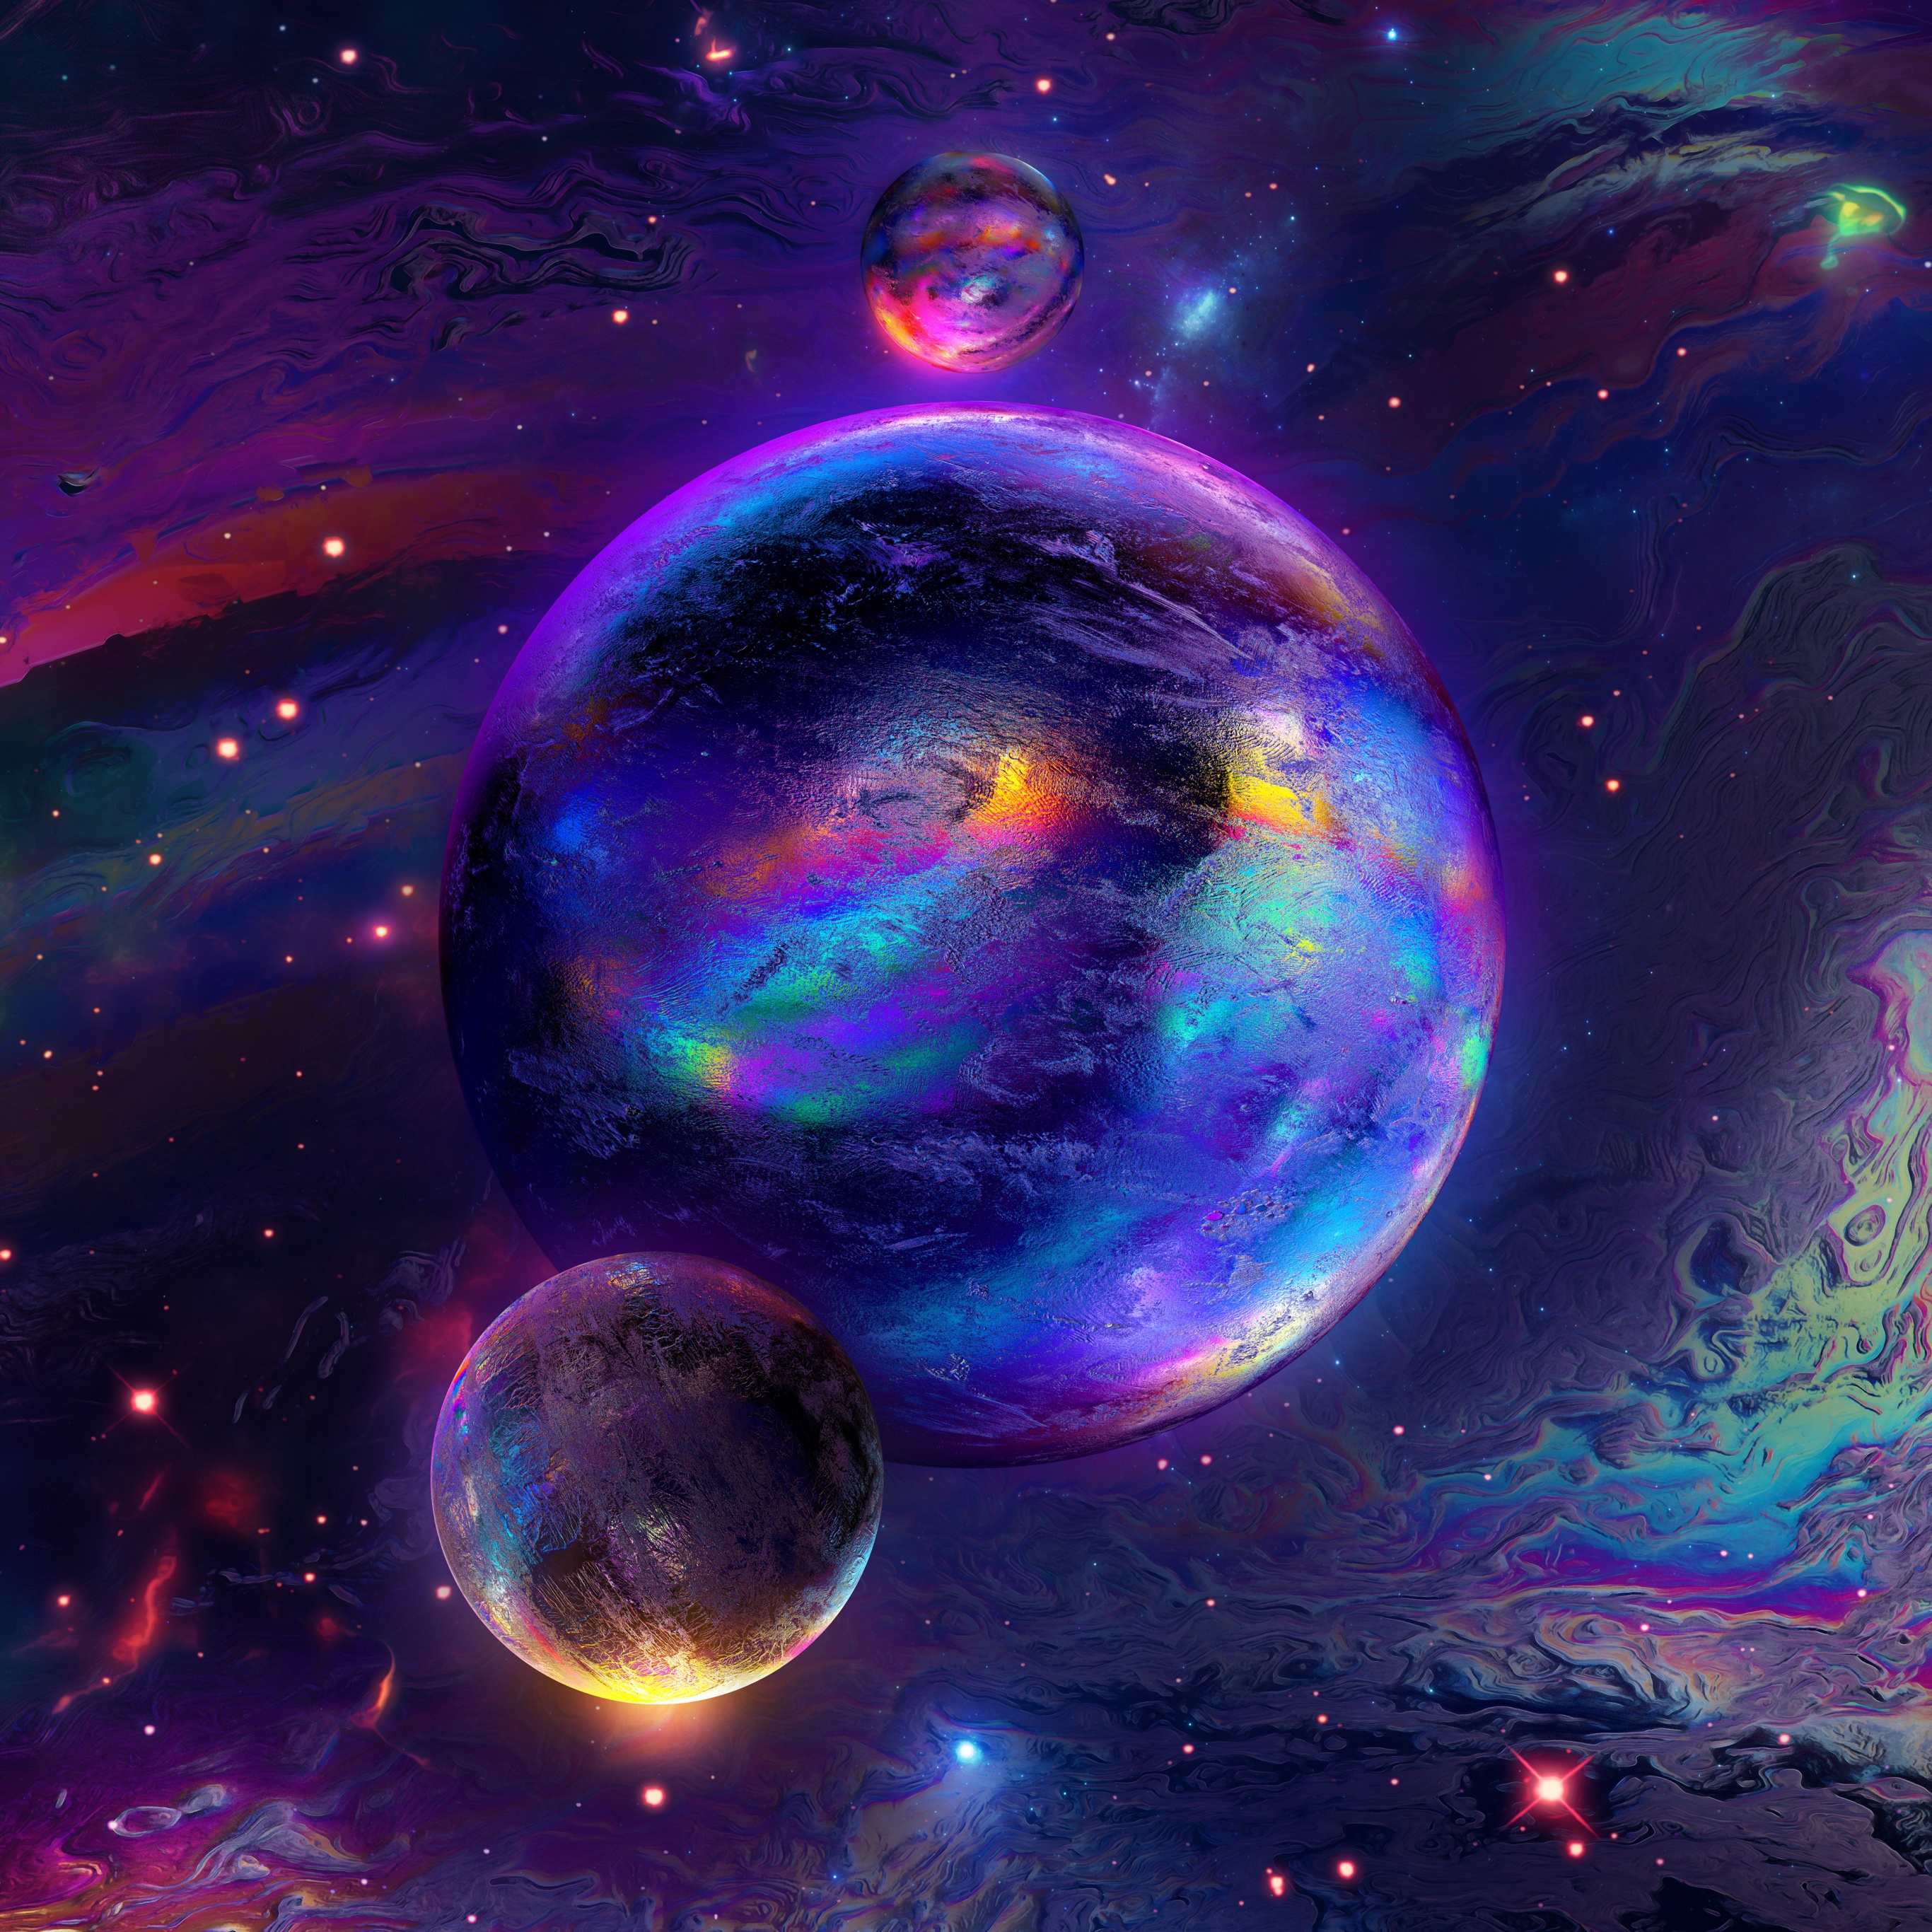 Rainbow Galaxy wallpaper by Mysteriousshadow  Download on ZEDGE  f5e4  Rainbow  galaxy Galaxy wallpaper Live wallpaper iphone